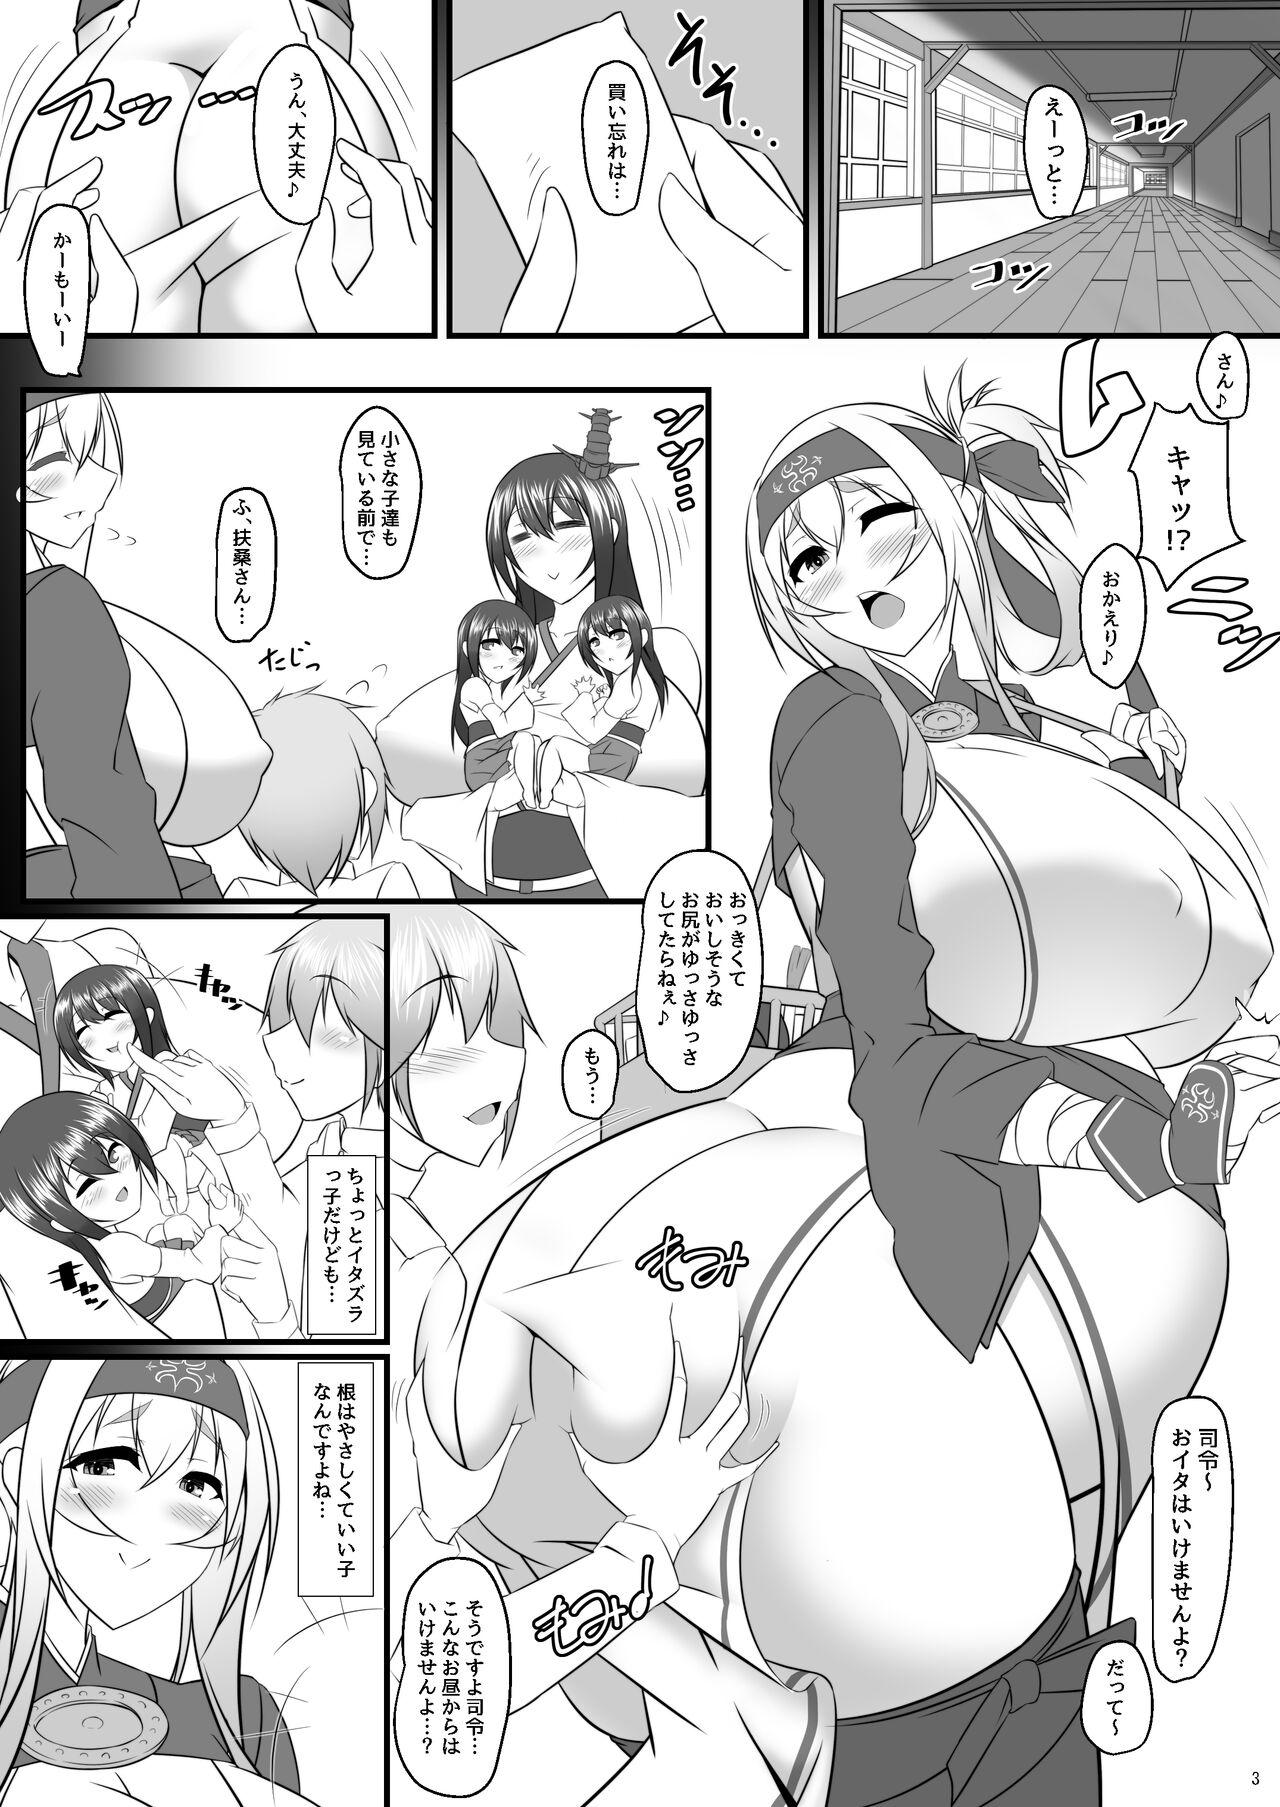 Abuse Bote Colle 6 - Kantai collection Staxxx - Page 3